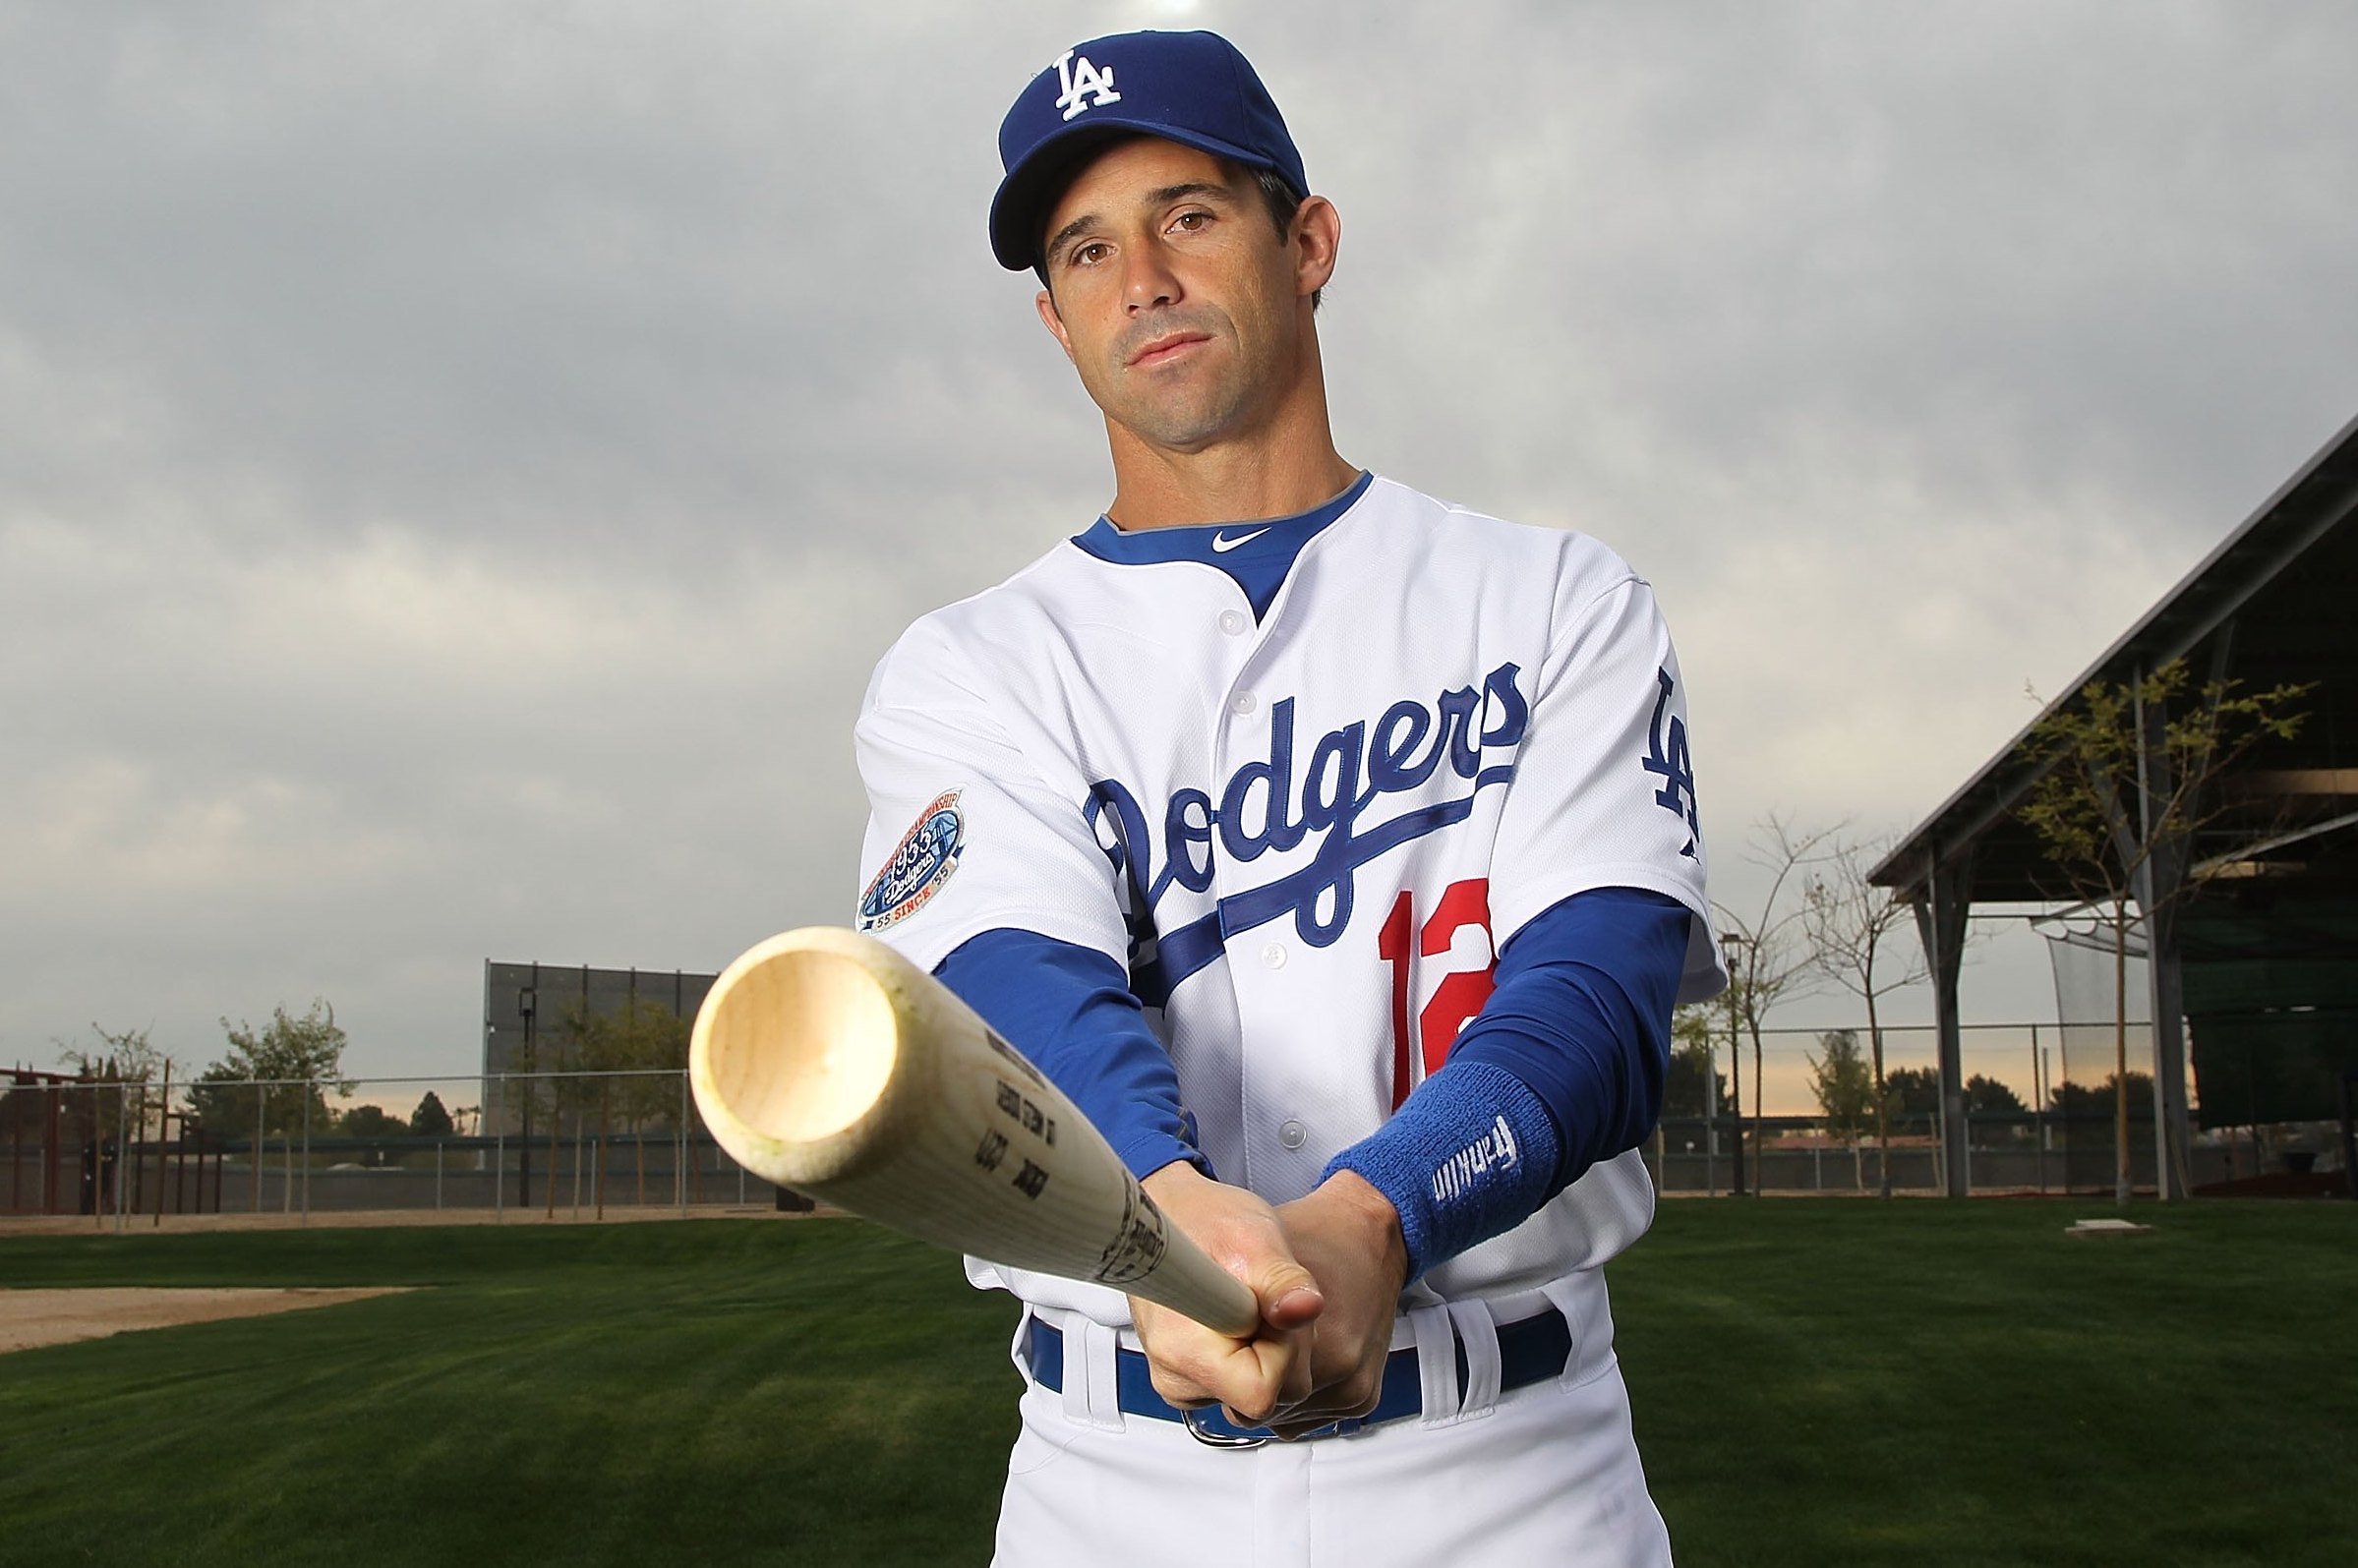 Former Astro Ausmus signs deal with Dodgers